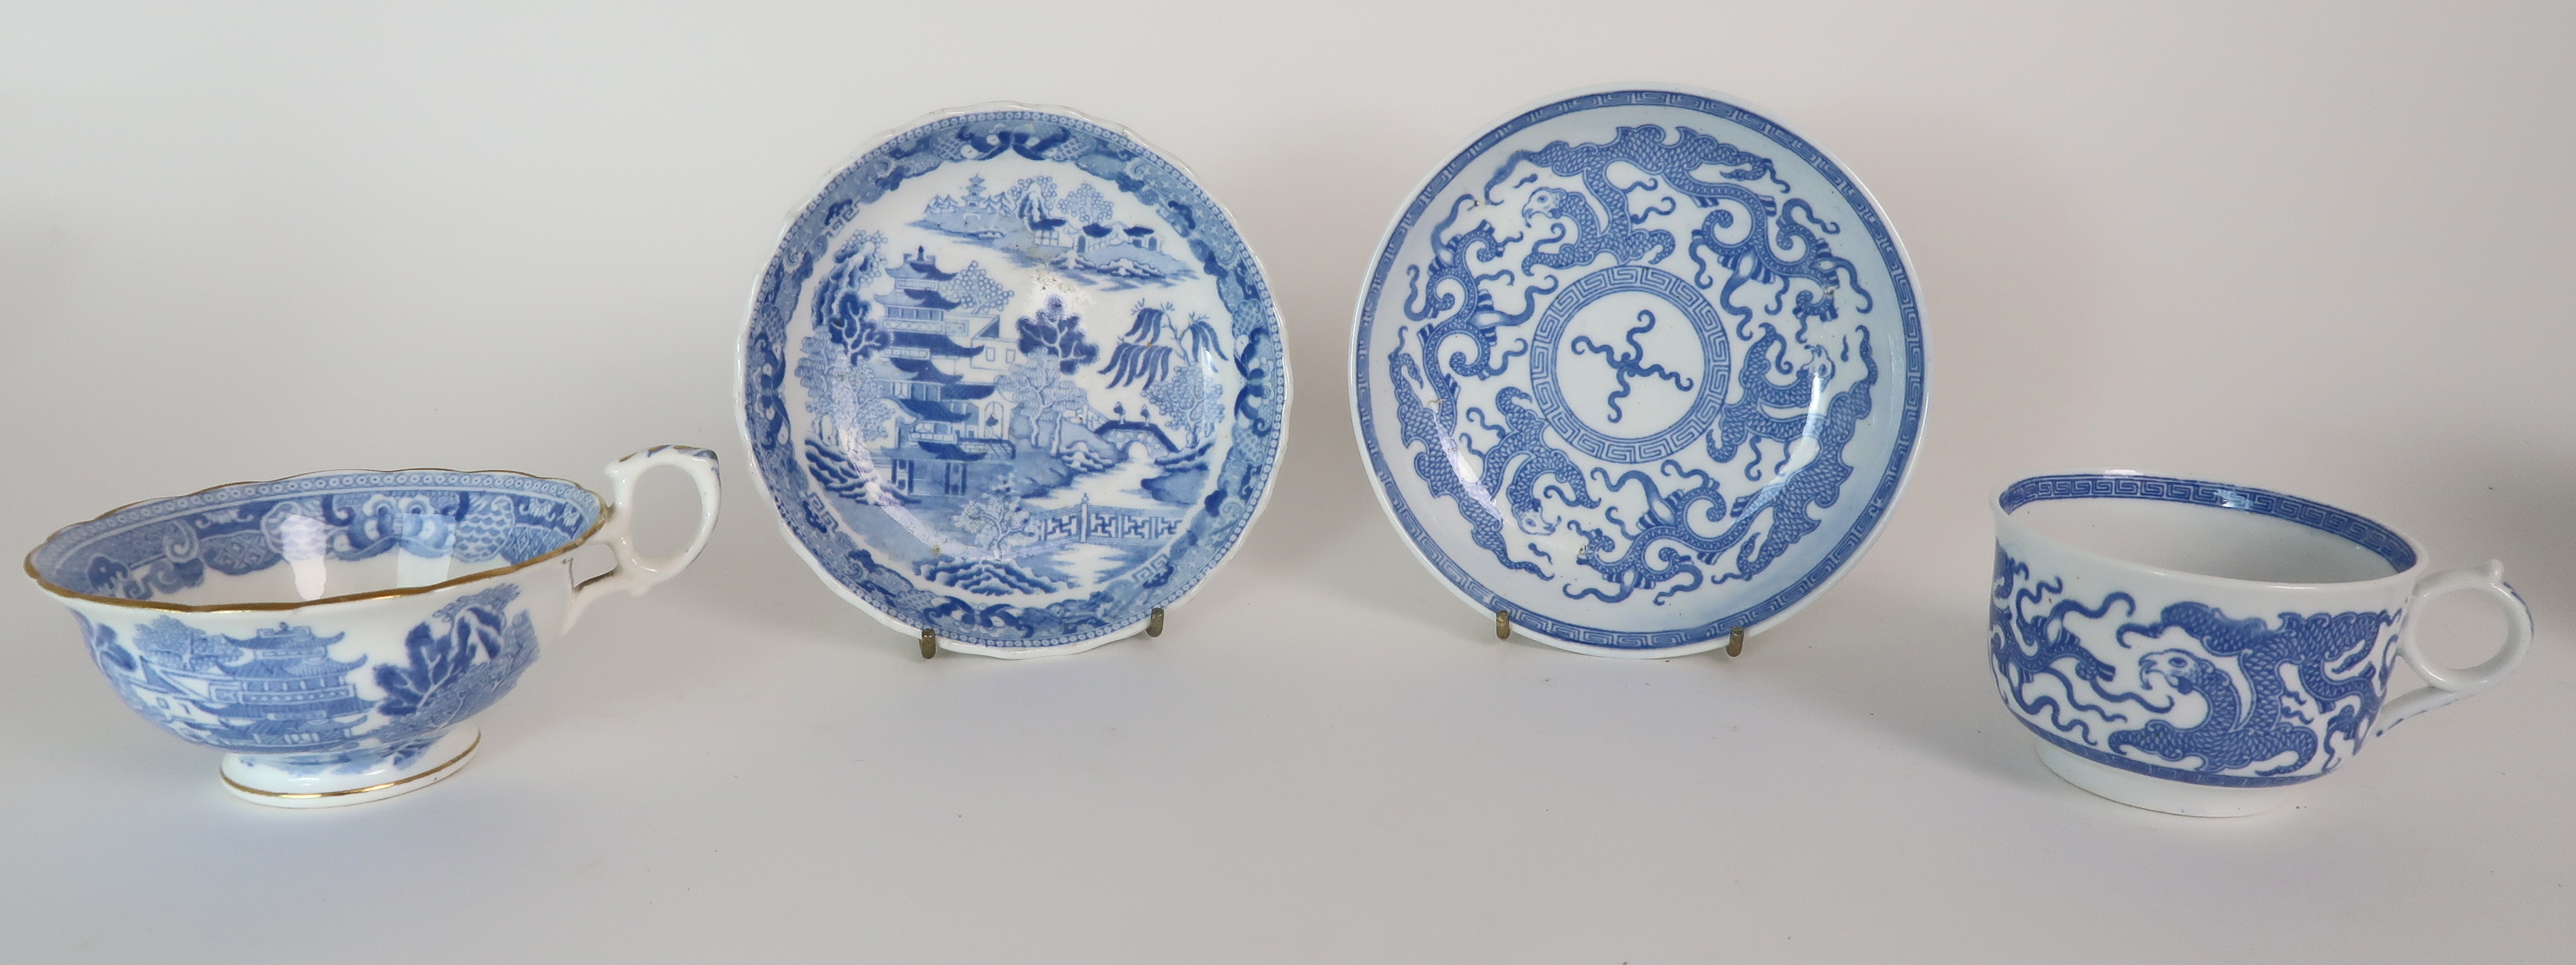 A COLLECTION OF ANTIQUE AND LATER ENGLISH BLUE AND WHITE PORCELAIN TEA/COFFEE WARES including - Image 19 of 20